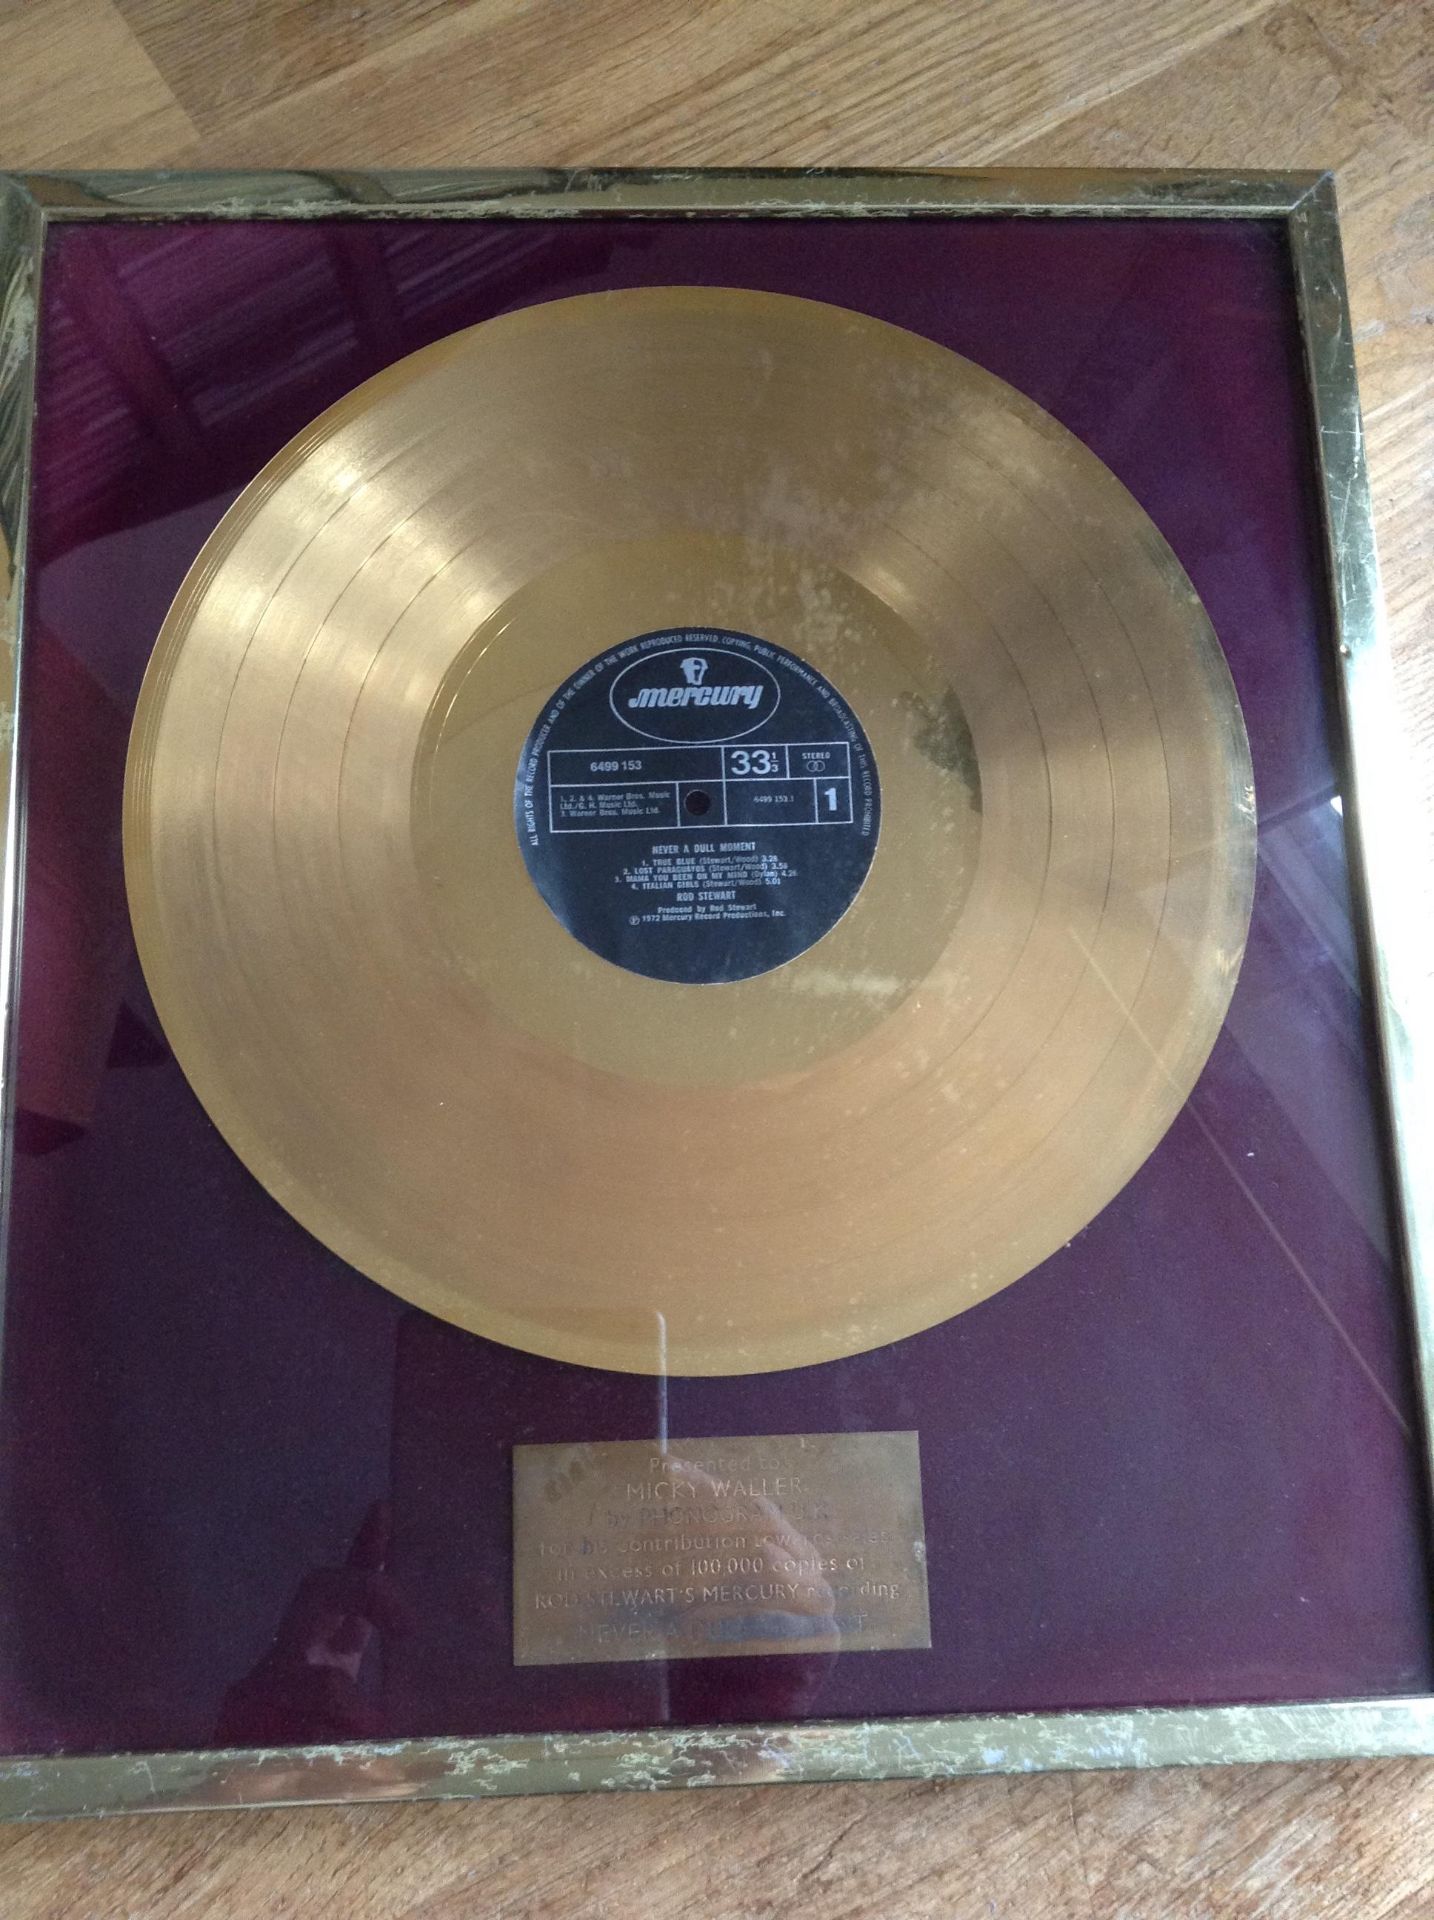 GENUINE MUSIC INDUSTRY GOLD & SILVER DISC AWARDS PRESENTED BY PHONOGRAM U.K TO DRUMMER MICKY WALLER - Image 3 of 5